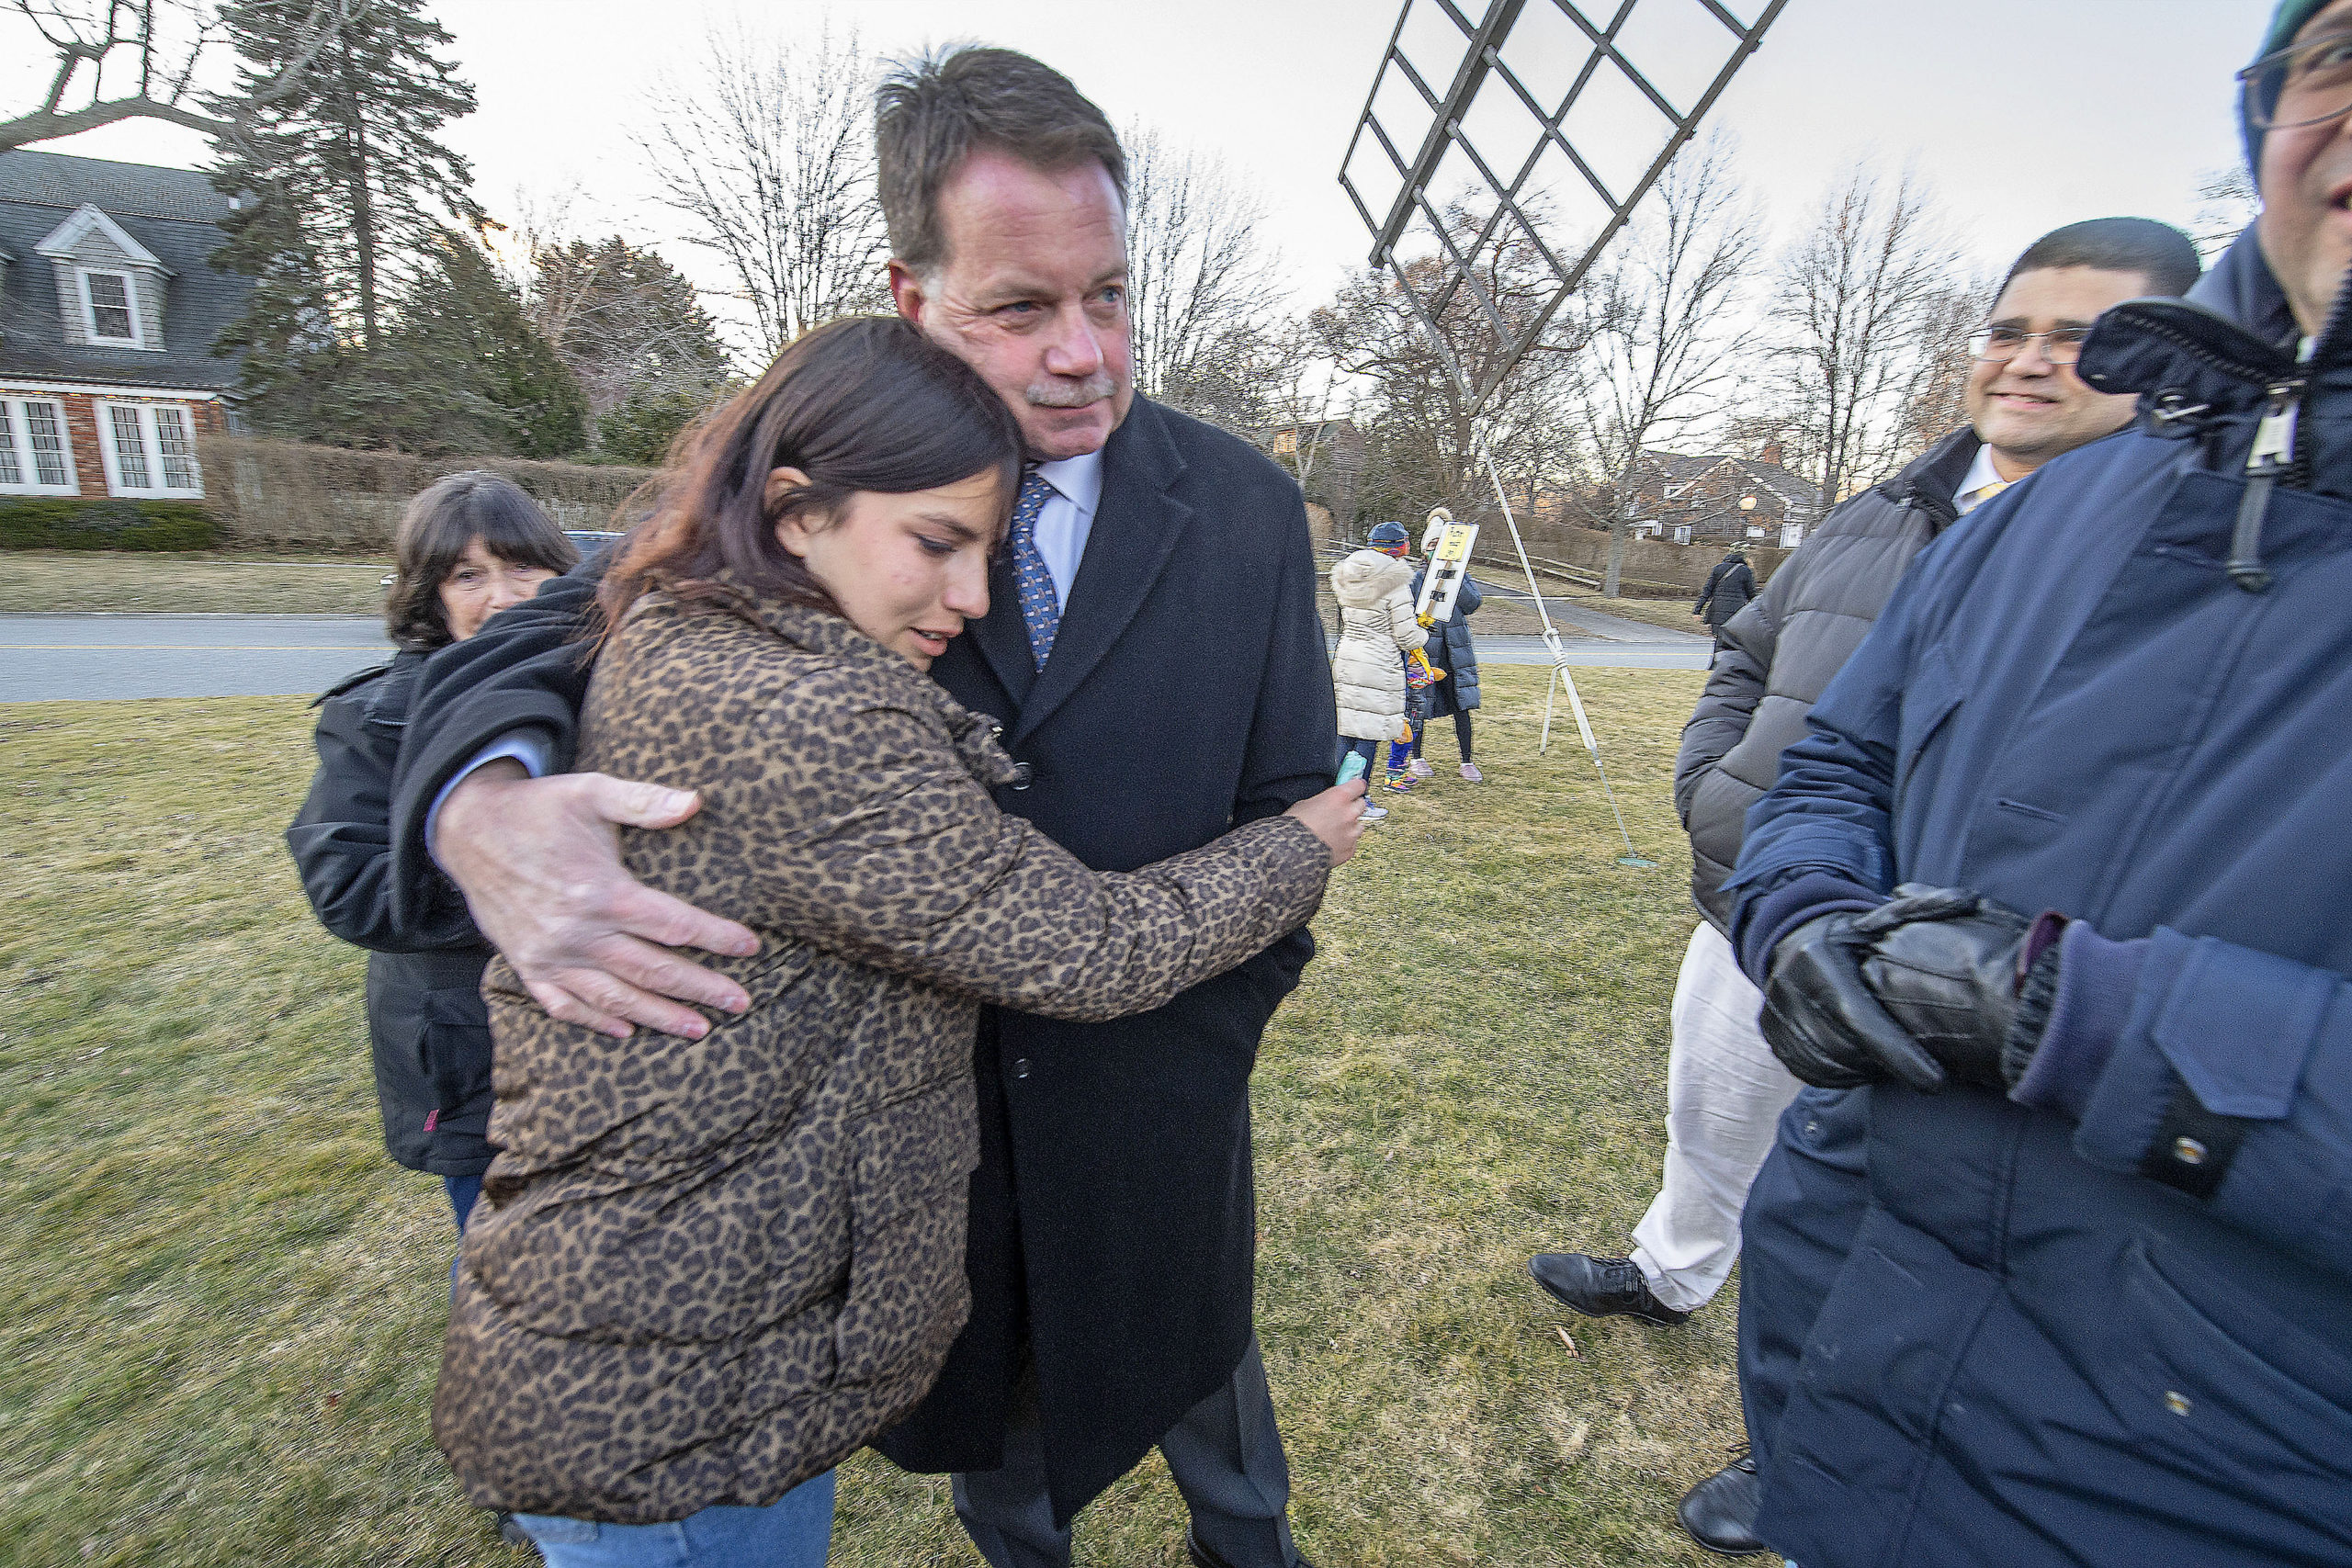 Vira Palamarchuk, whose father is fighting on the front lines in Ukraine, is comforted by East Hampton Village Mayor Jerry Larsen during a rally last Thursday on the Hook Mill Village Green in East Hampton. MICHAEL HELLER